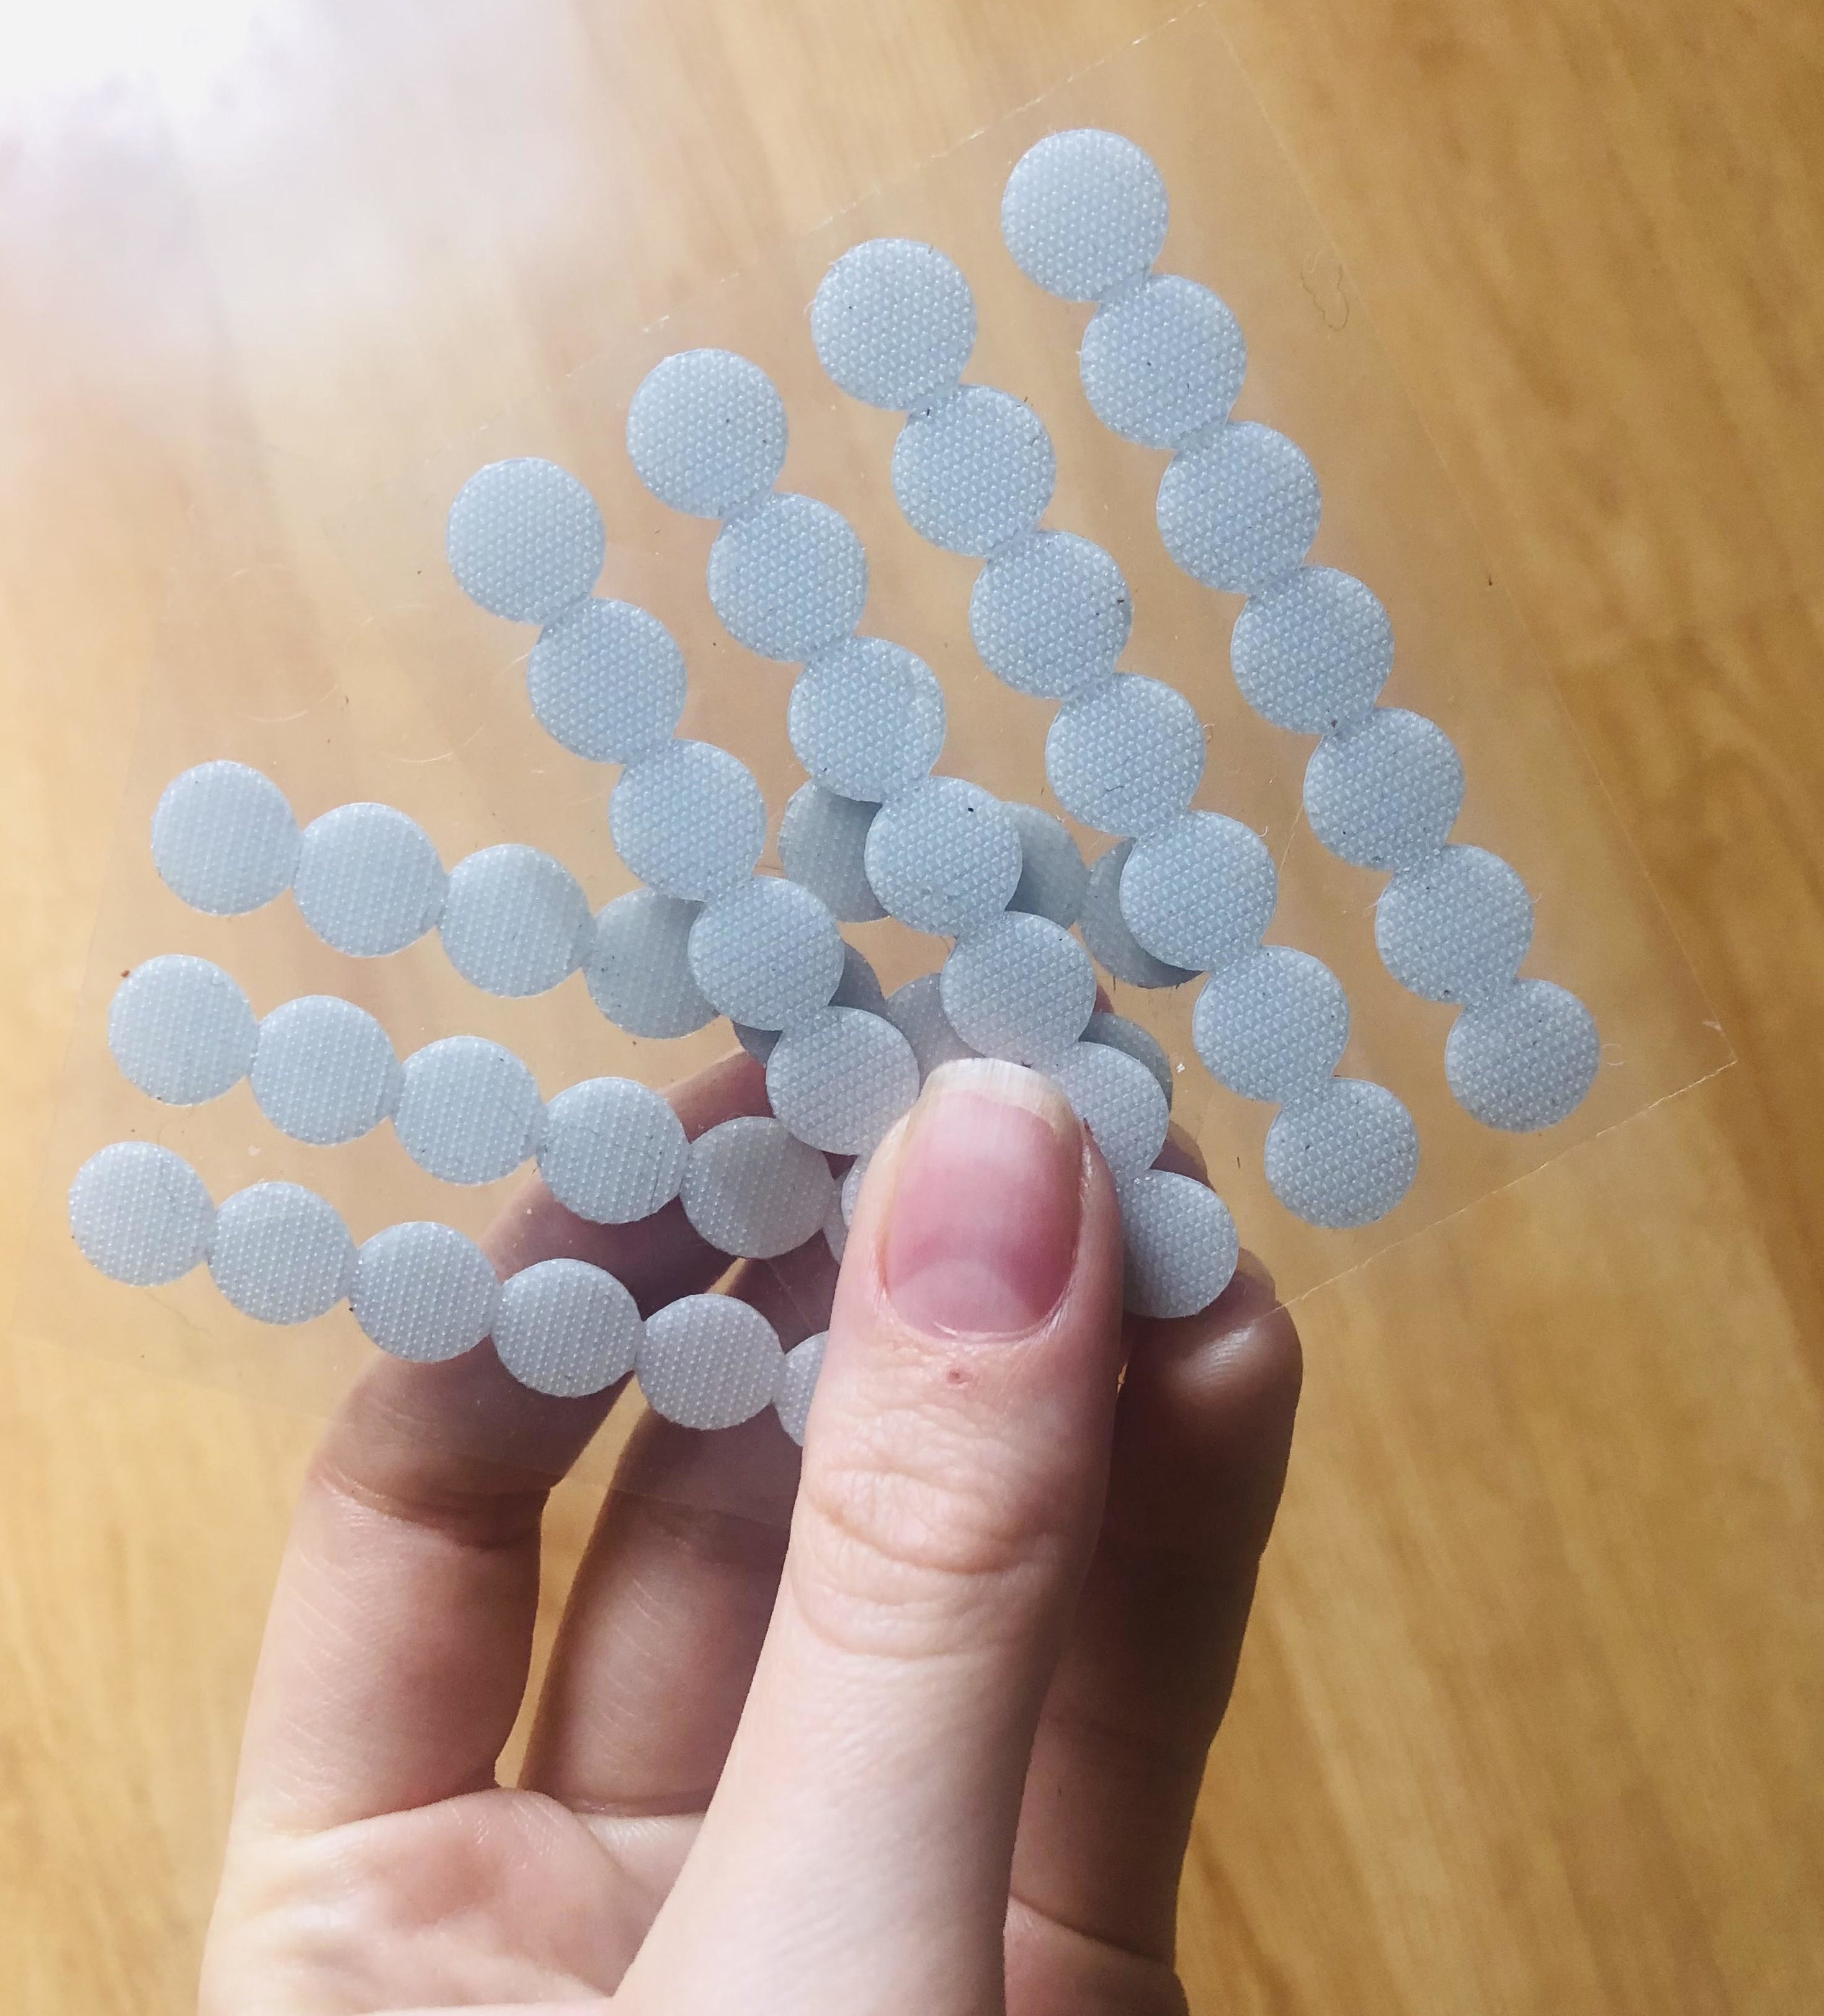 A person holding two sheets of the dots